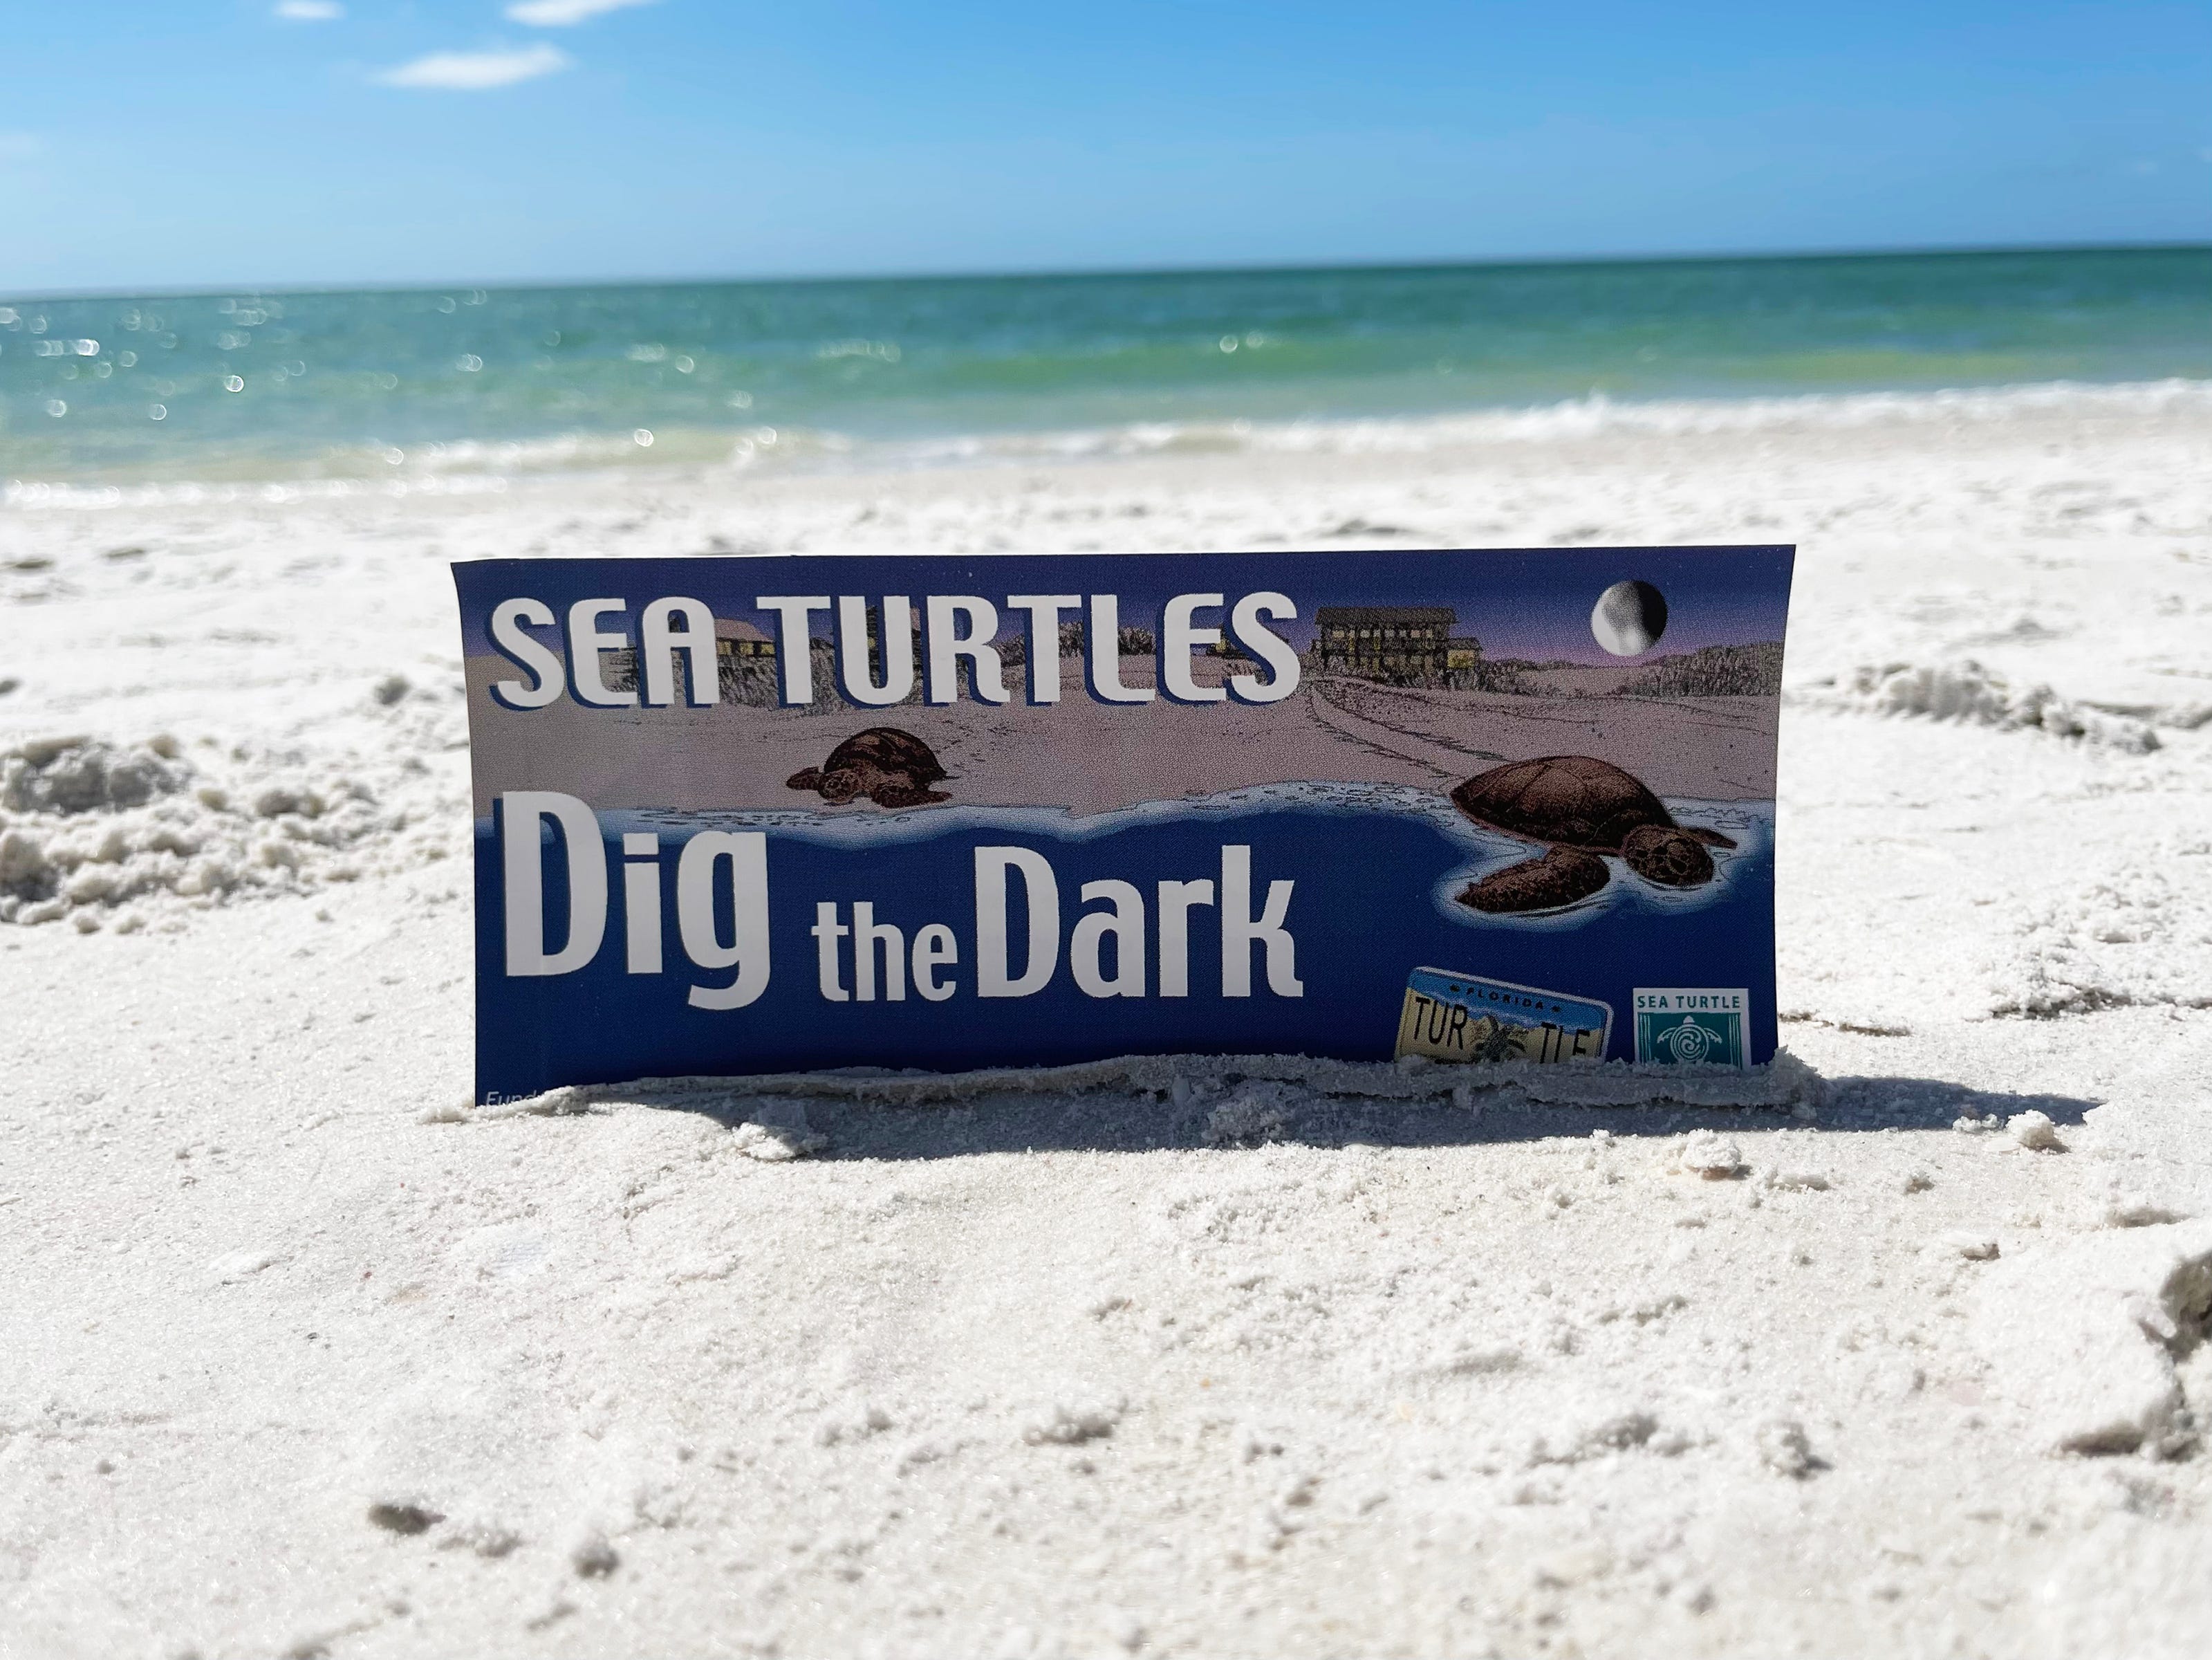 The first reading of a sea turtle lighting ordinance was brought to the Marco Island City Council concerning lighting for buildings close to beaches necessary to protect the sea turtle nesting habitats.